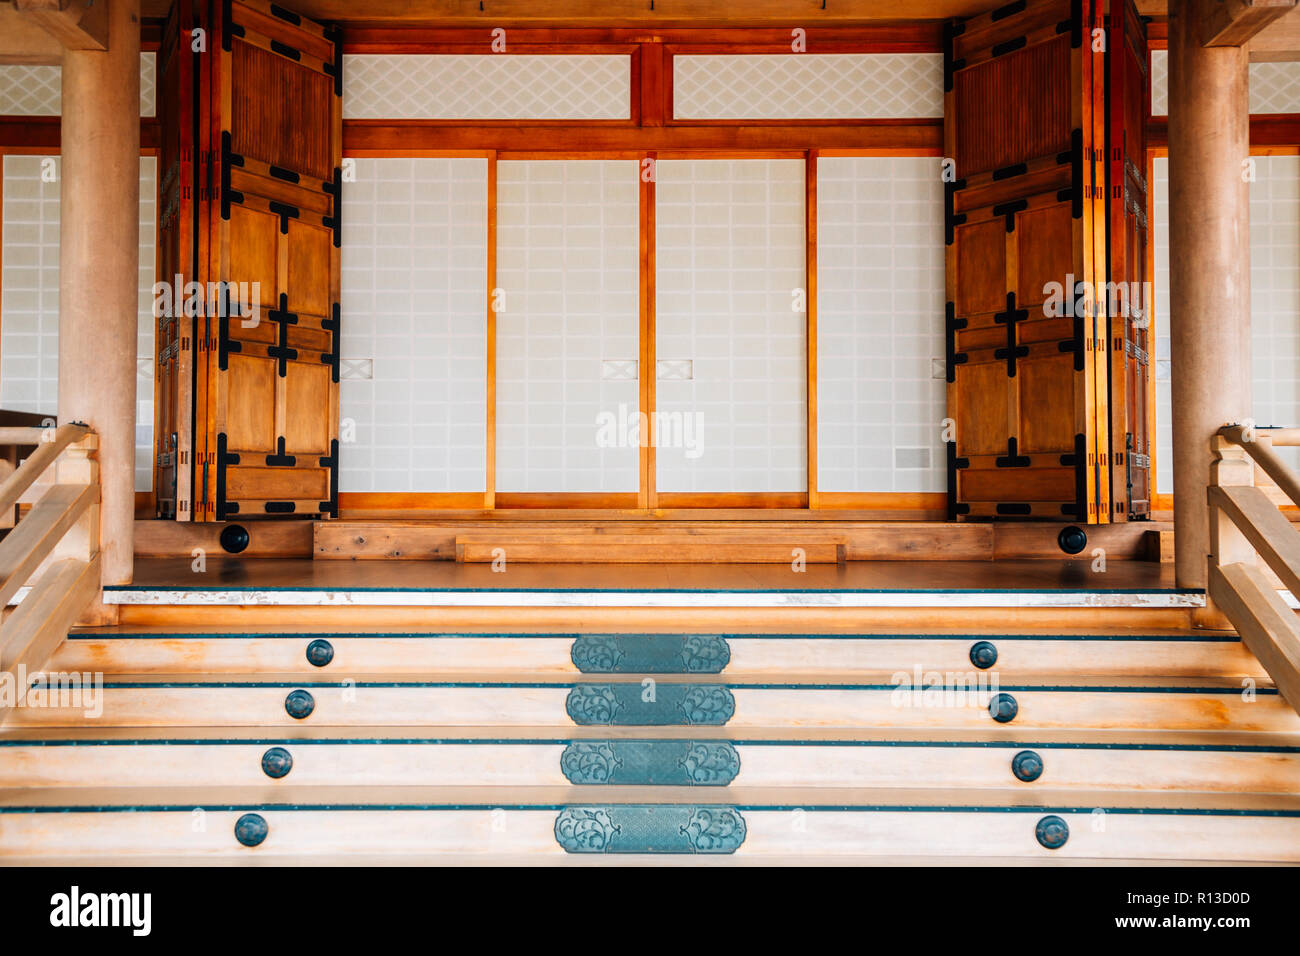 Chion-in temple, historic architecture in Kyoto, Japan Stock Photo